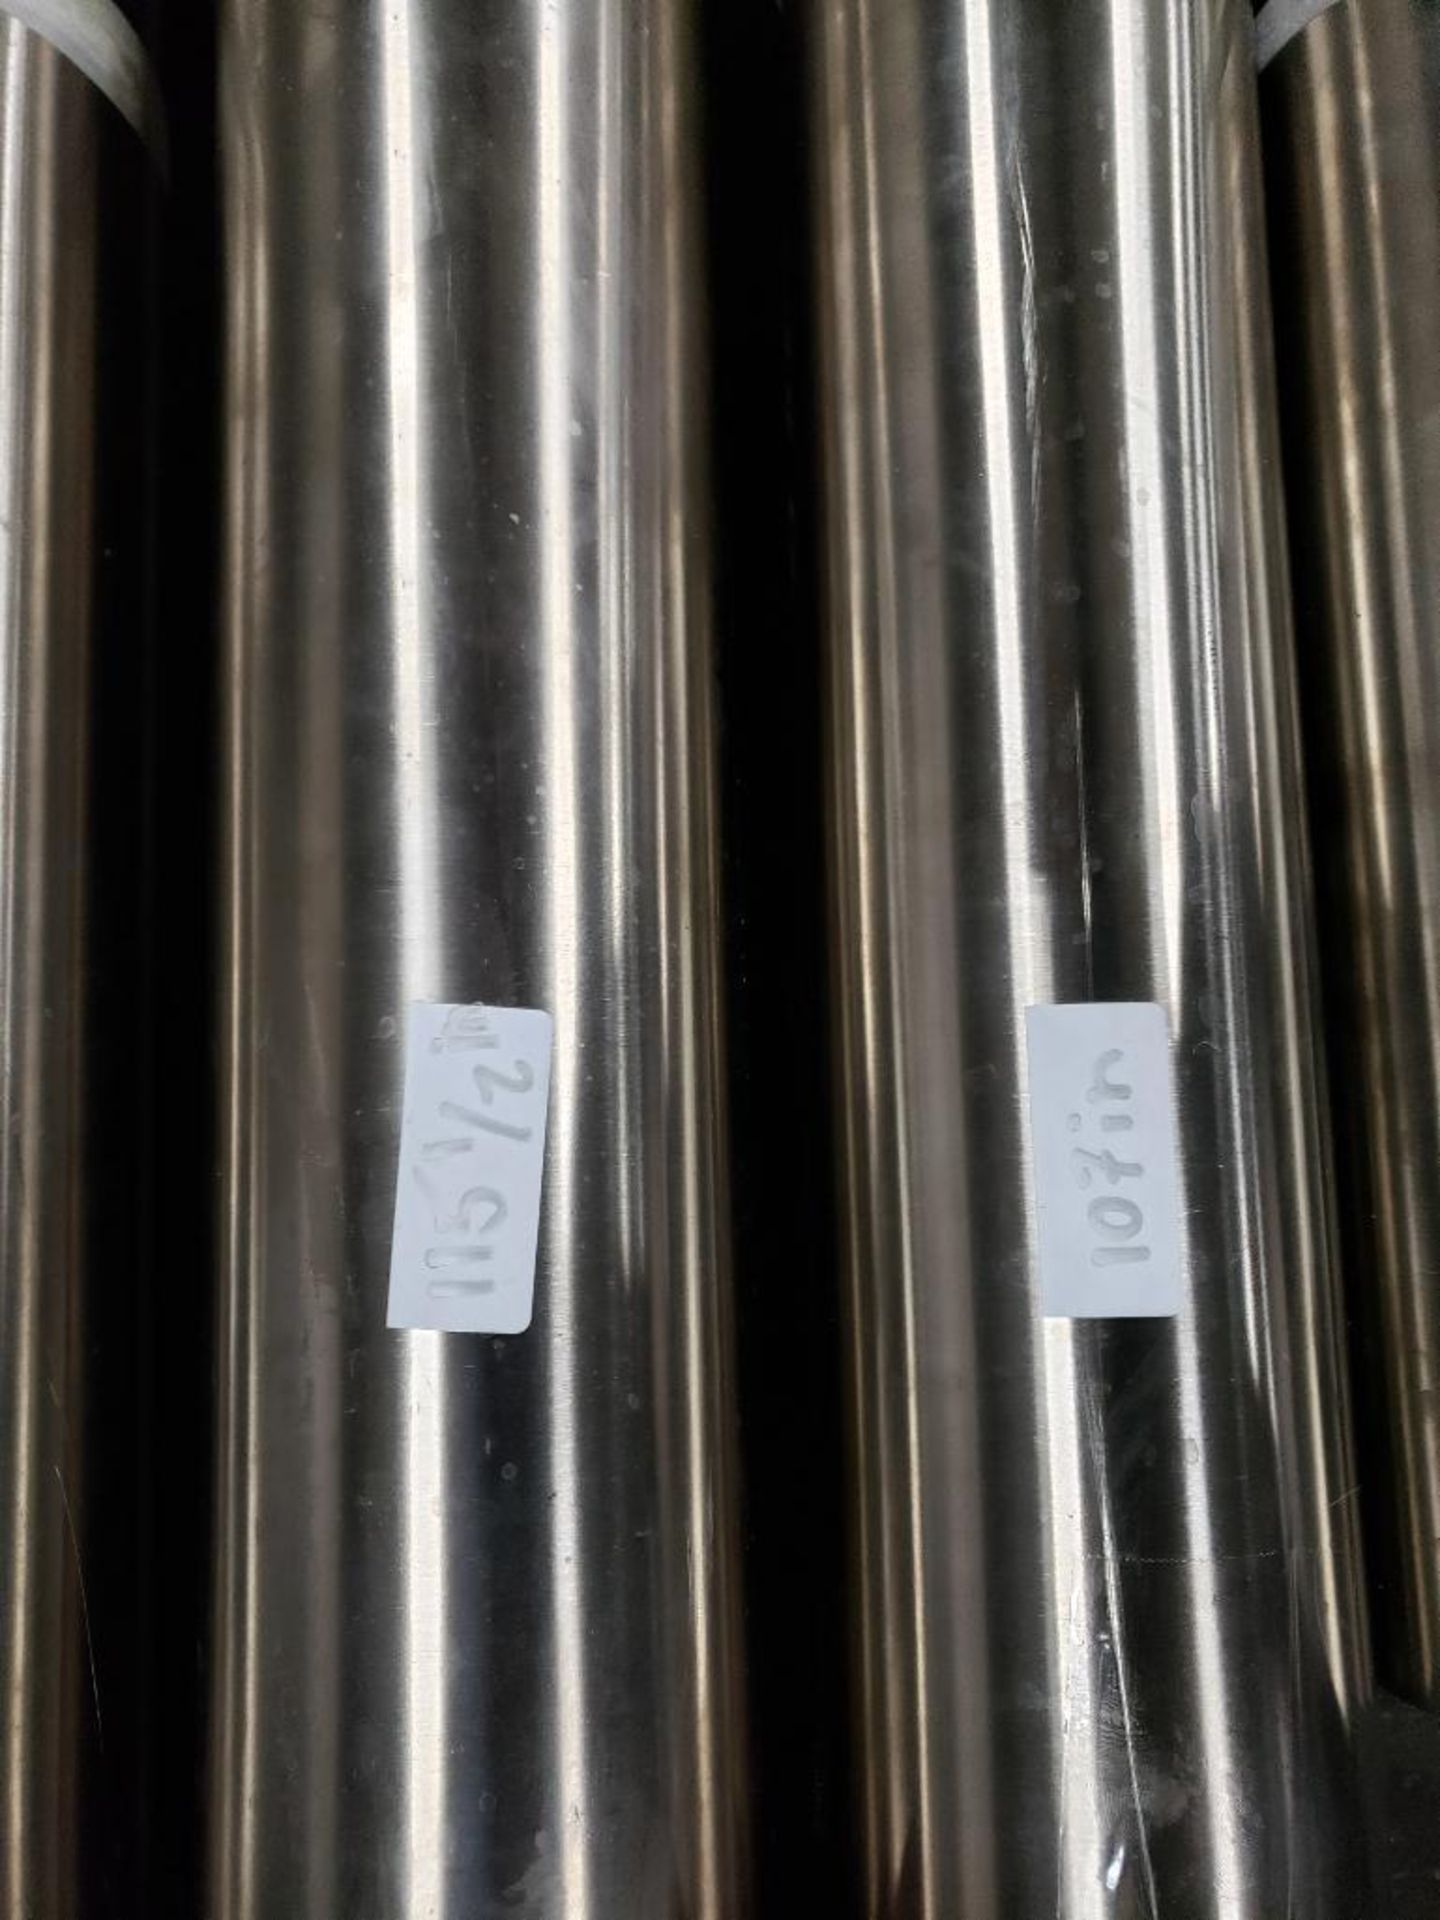 4 inch - Approx 83 feet total of 4in stainless food grade pipe in assorted lengths. - Image 9 of 14